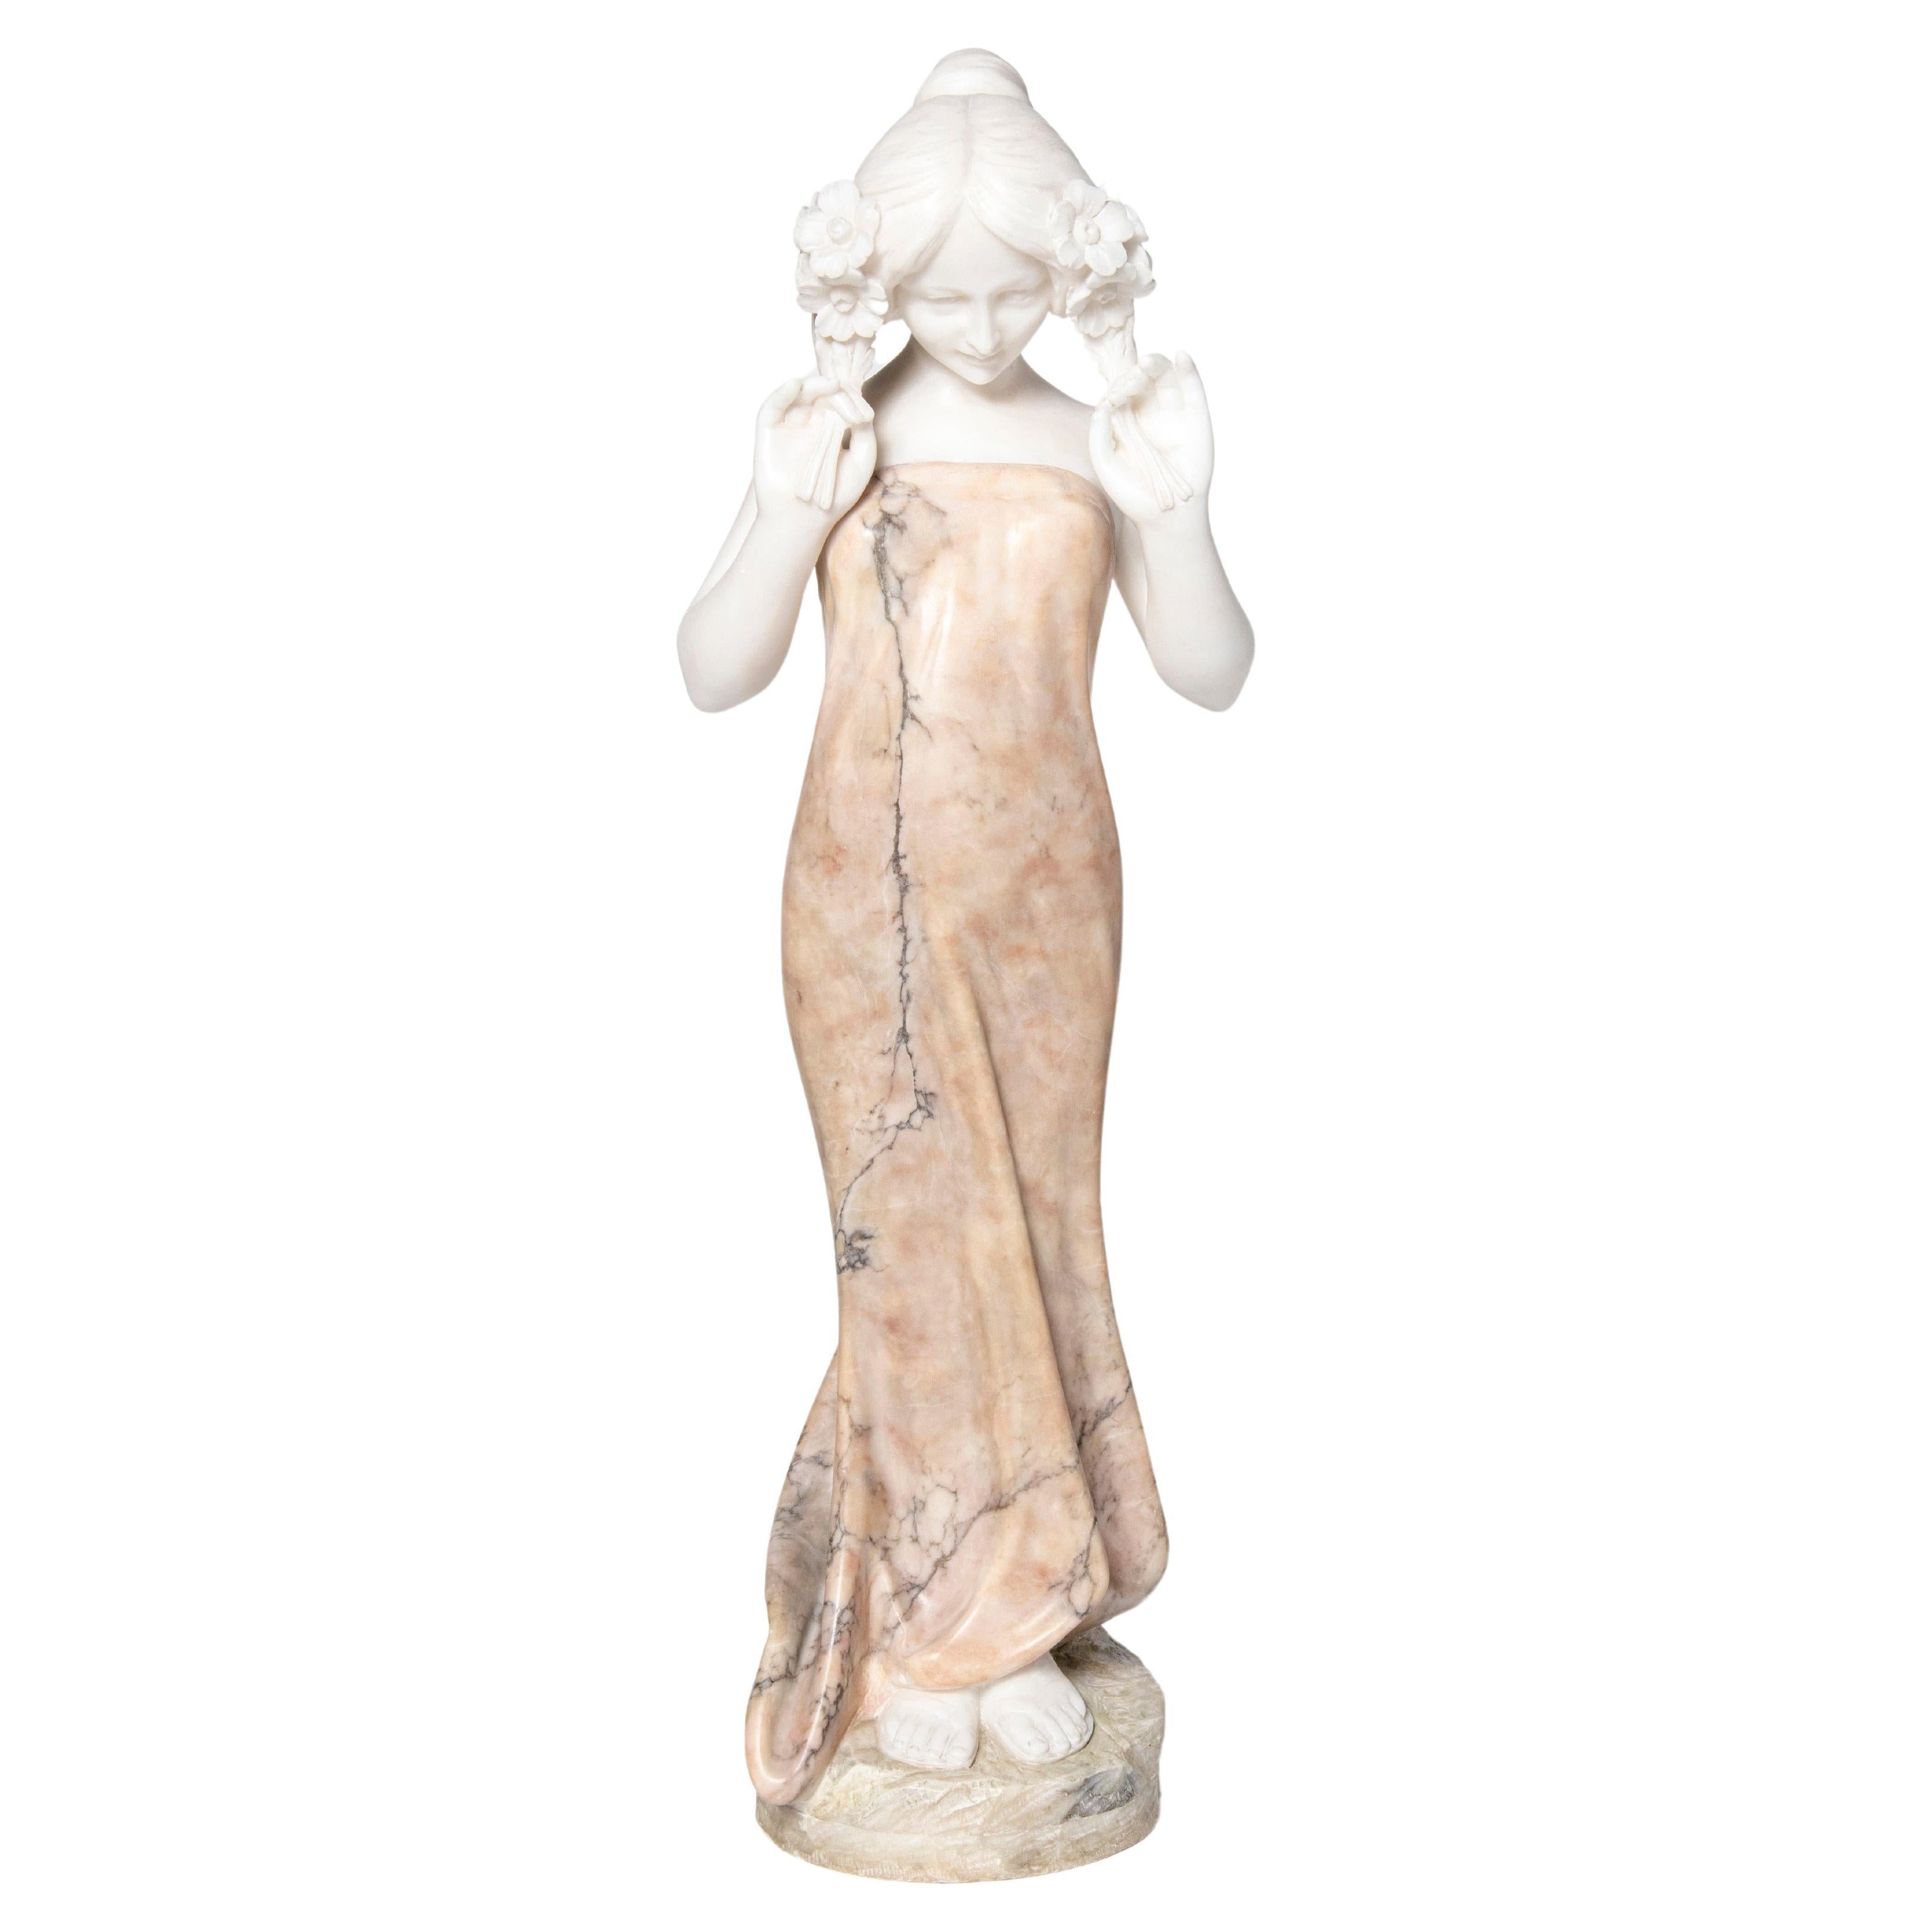 Alabaster sculpture signed G. Gambogi. Italy, early 20th century.